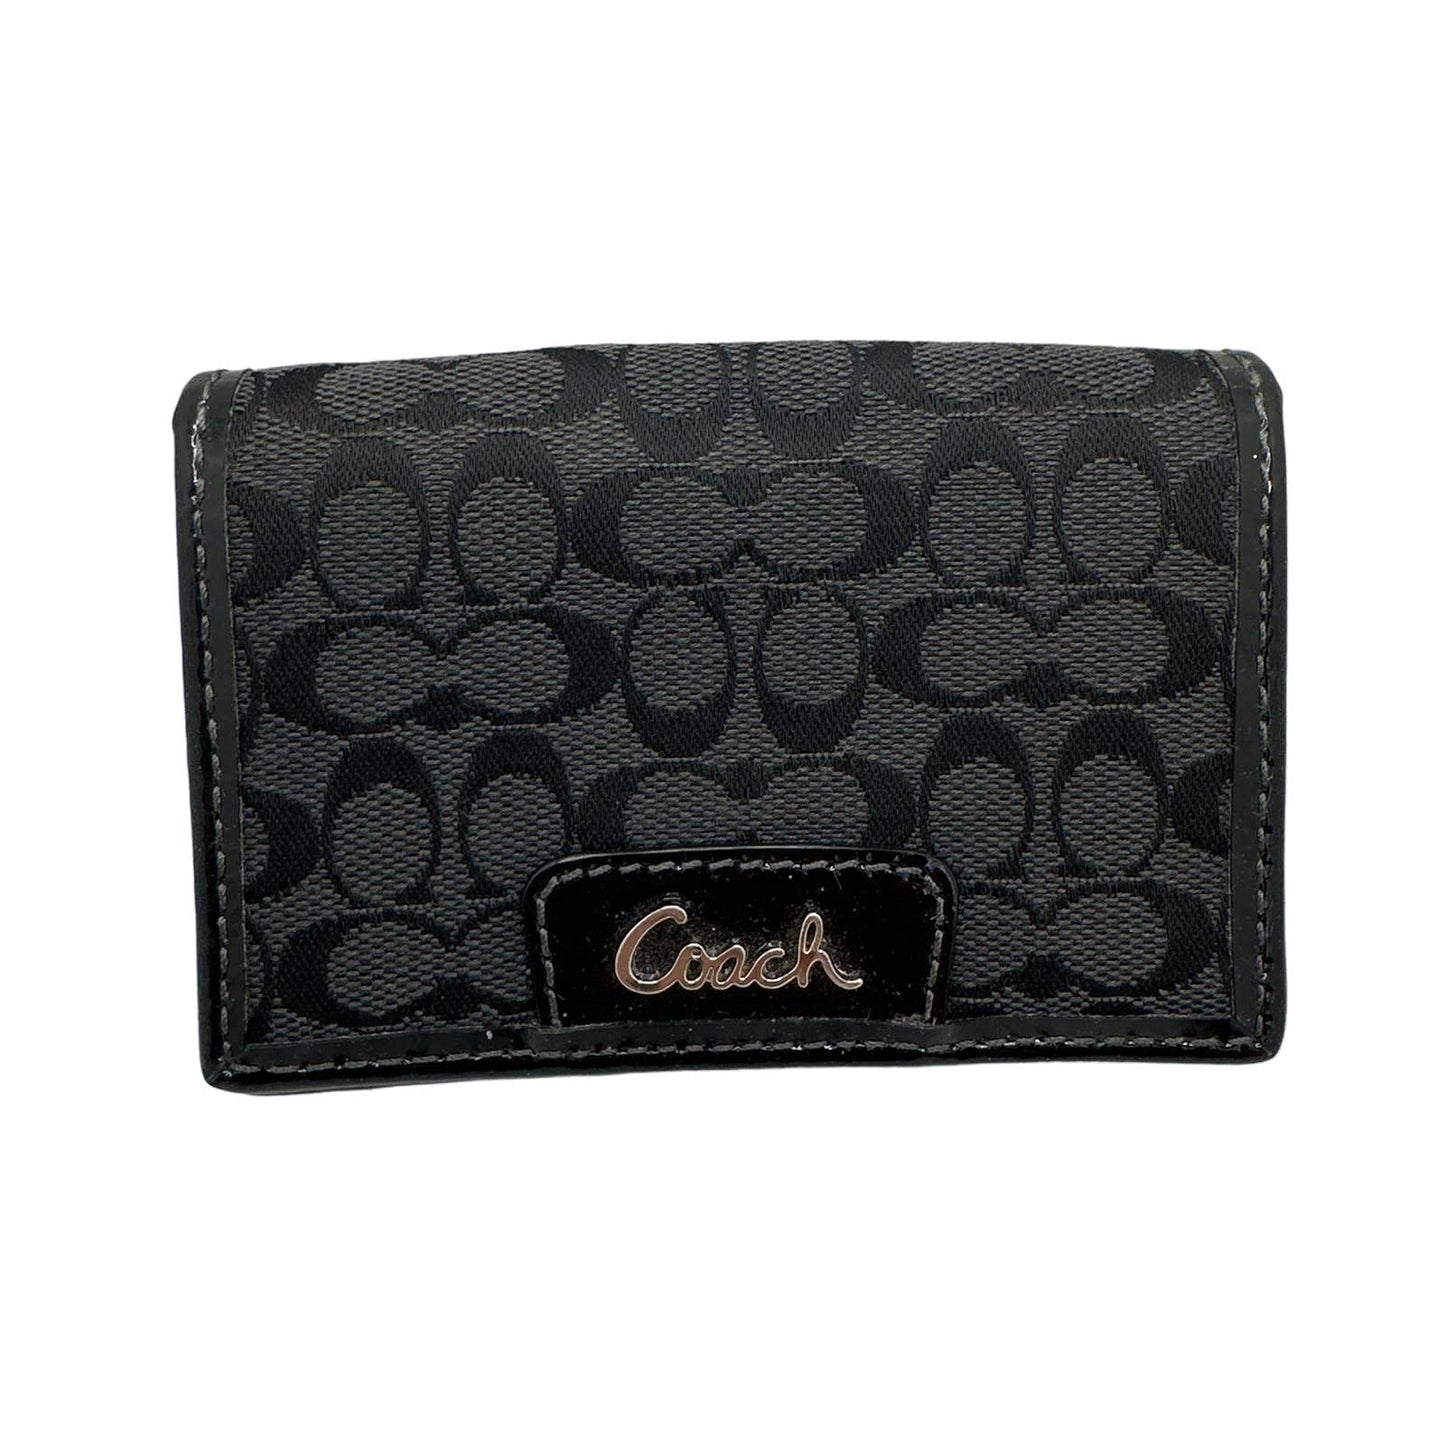 COACH  Black Signature Canvas Small Card Holder / Wallet